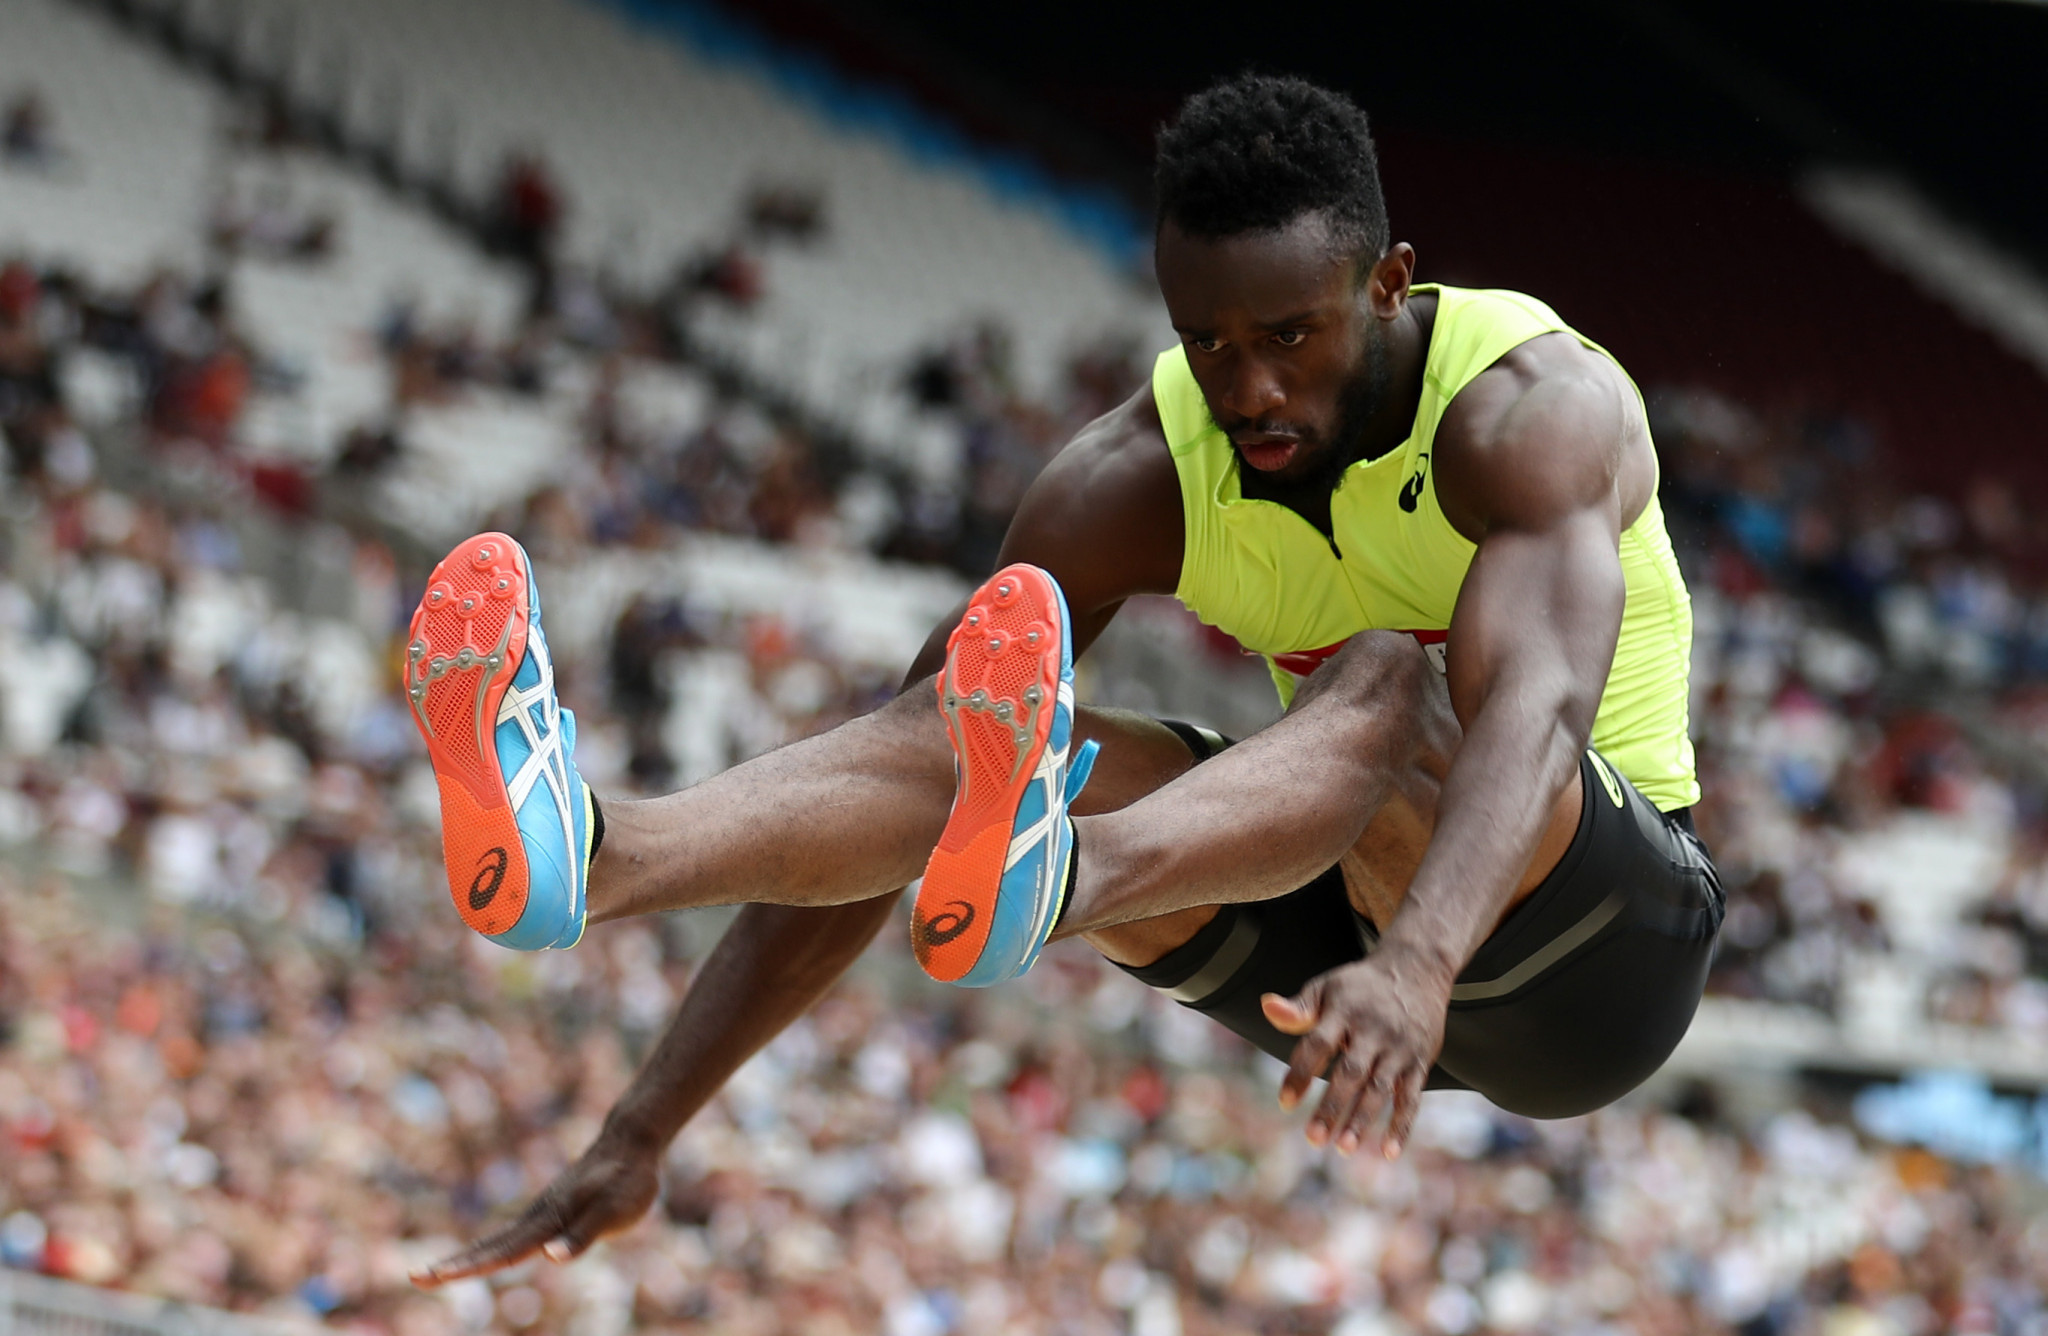 The American long jumper argued contaminated beef was to blame for his failed drugs test ©Getty Images